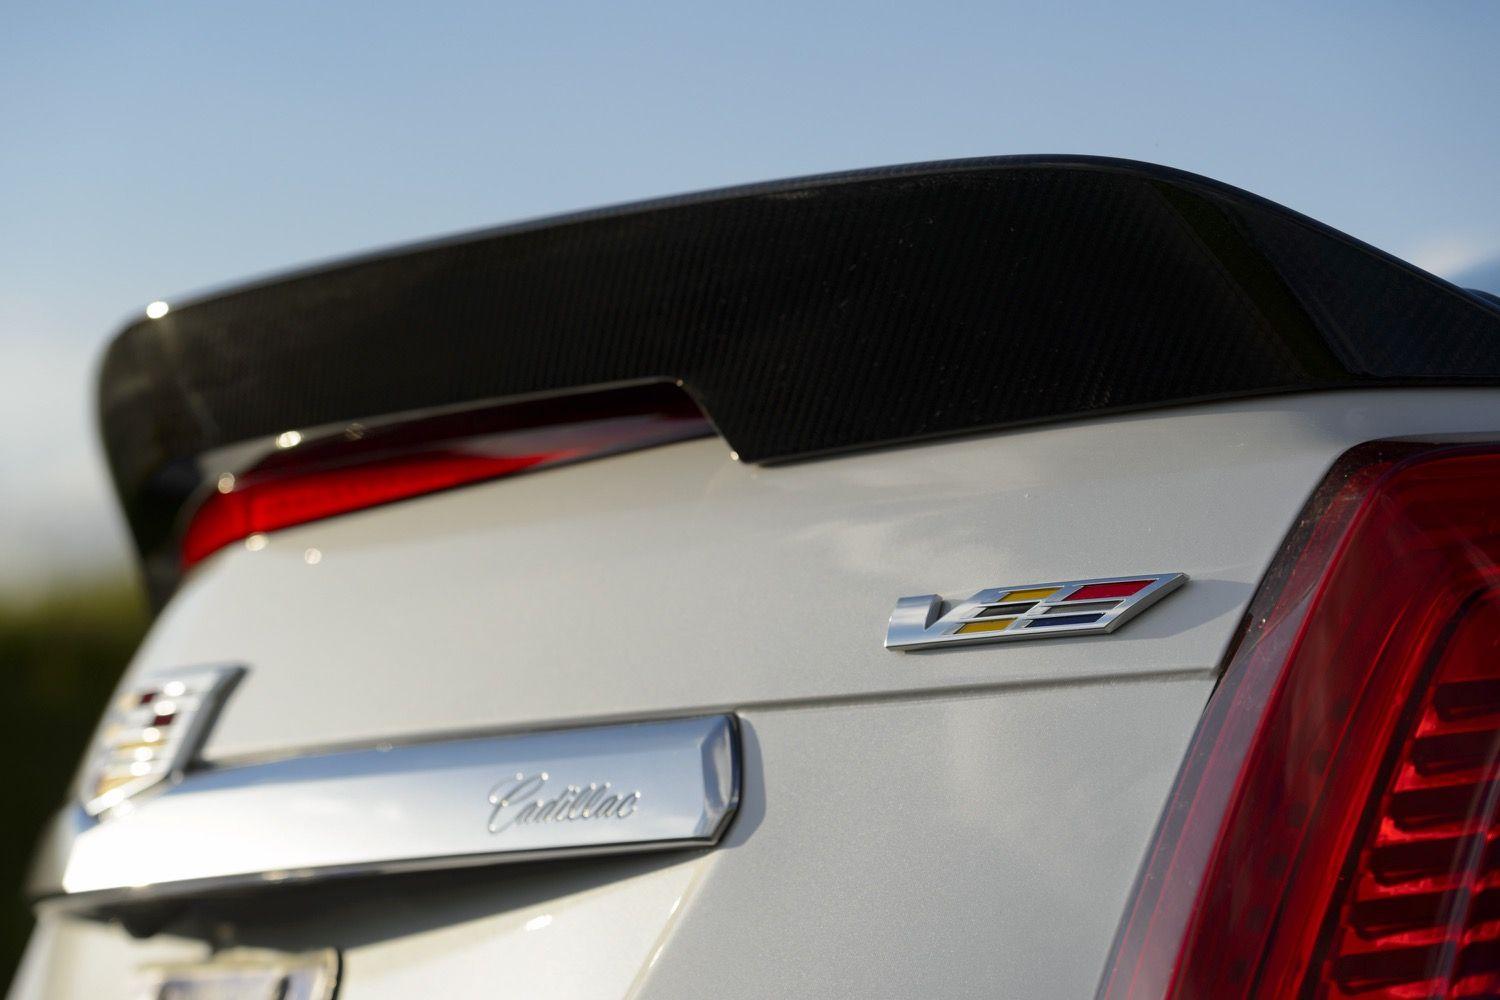 CTS-V Logo - 2017 Cadillac CTS-V Info, Specs, Pictures, Wiki | GM Authority